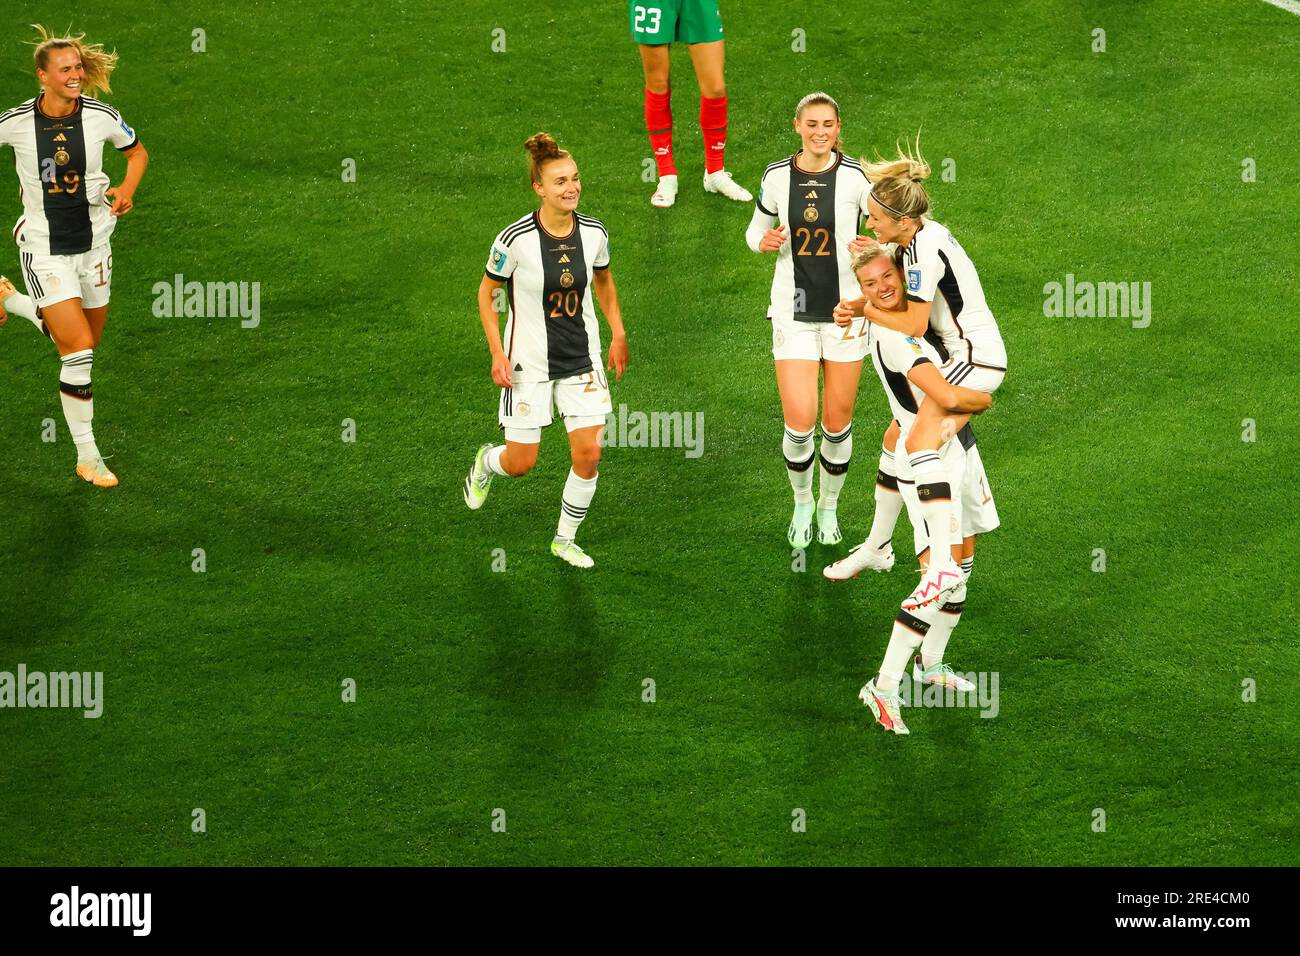 Melbourne, Australia. 24th July, 2023. Alexandra Popp-Hoppe of Germany celebrates with her team after scoring a goal during the FIFA Women's World Cup Australia & New Zealand 2023 Group match between Germany and Morocco at Melbourne Rectangular Stadium. Germany won the game 6-0. (Photo by George Hitchens/SOPA Images/Sipa USA) Credit: Sipa USA/Alamy Live News Stock Photo